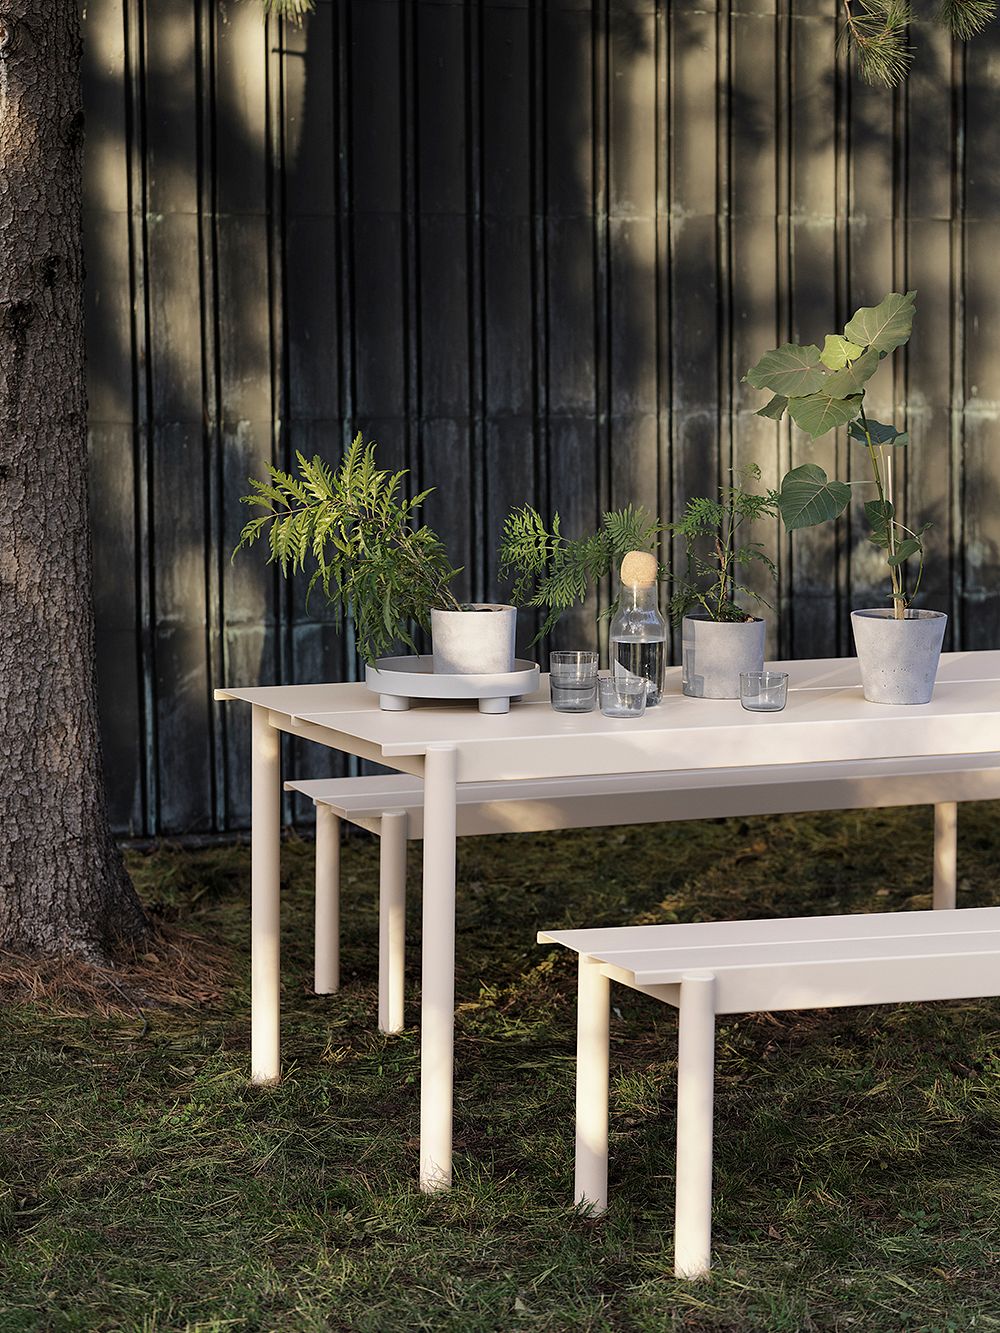 An image of Muuto's Linear Steel table and benches in the summer house garden, as part of the summer cottage decor.